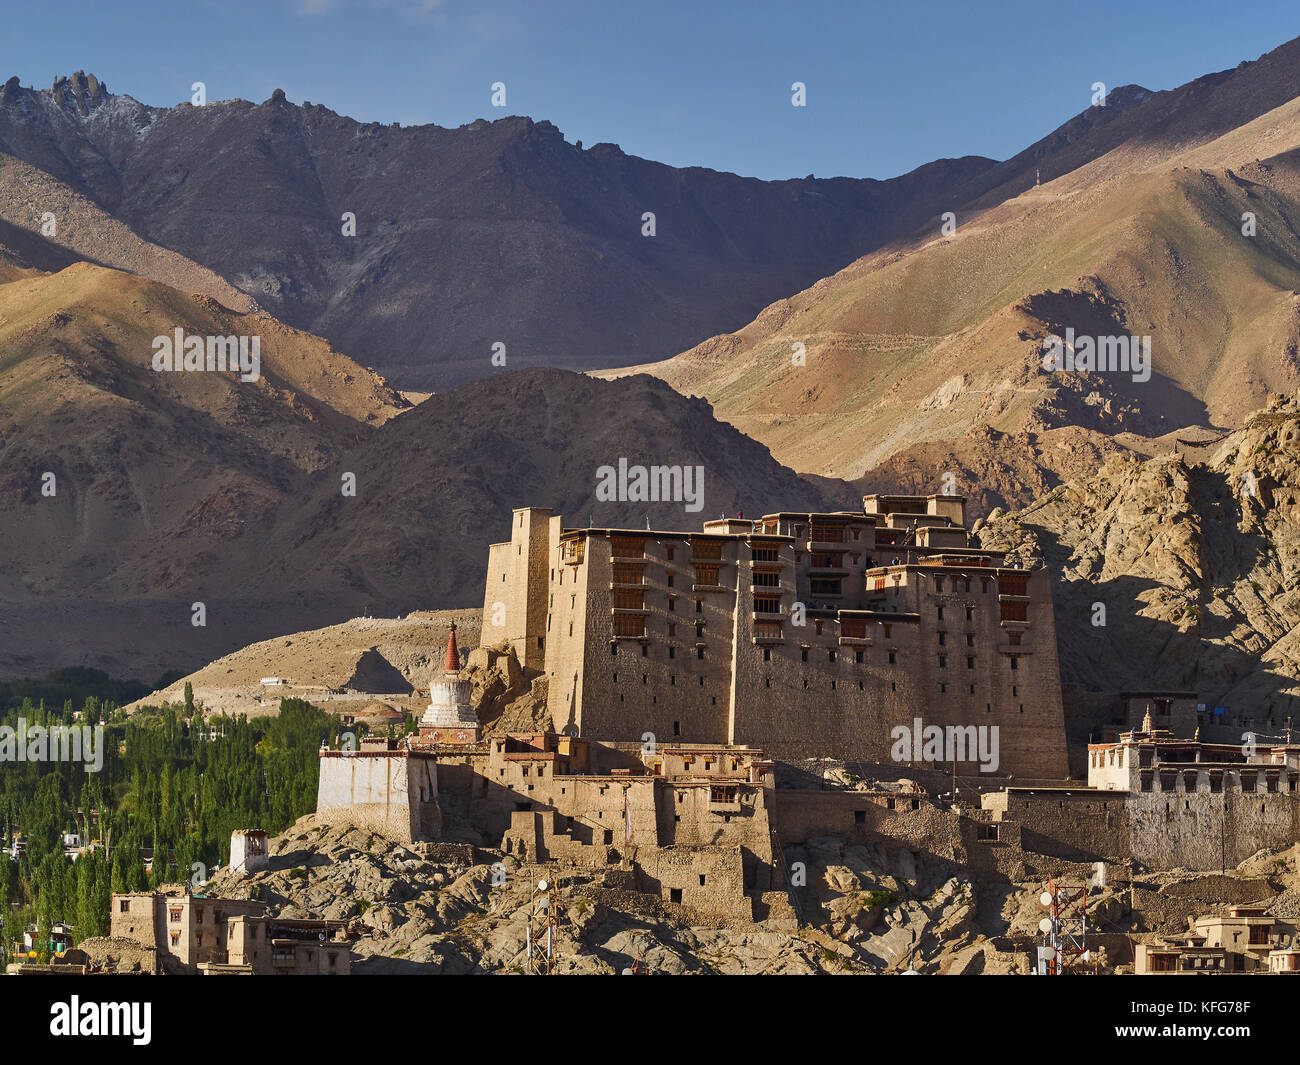 The ancient royal palace of Leh: a large clay building stands among the mountains above the city, white Buddhist stupas, Ladakh, Northern India. Stock Photo